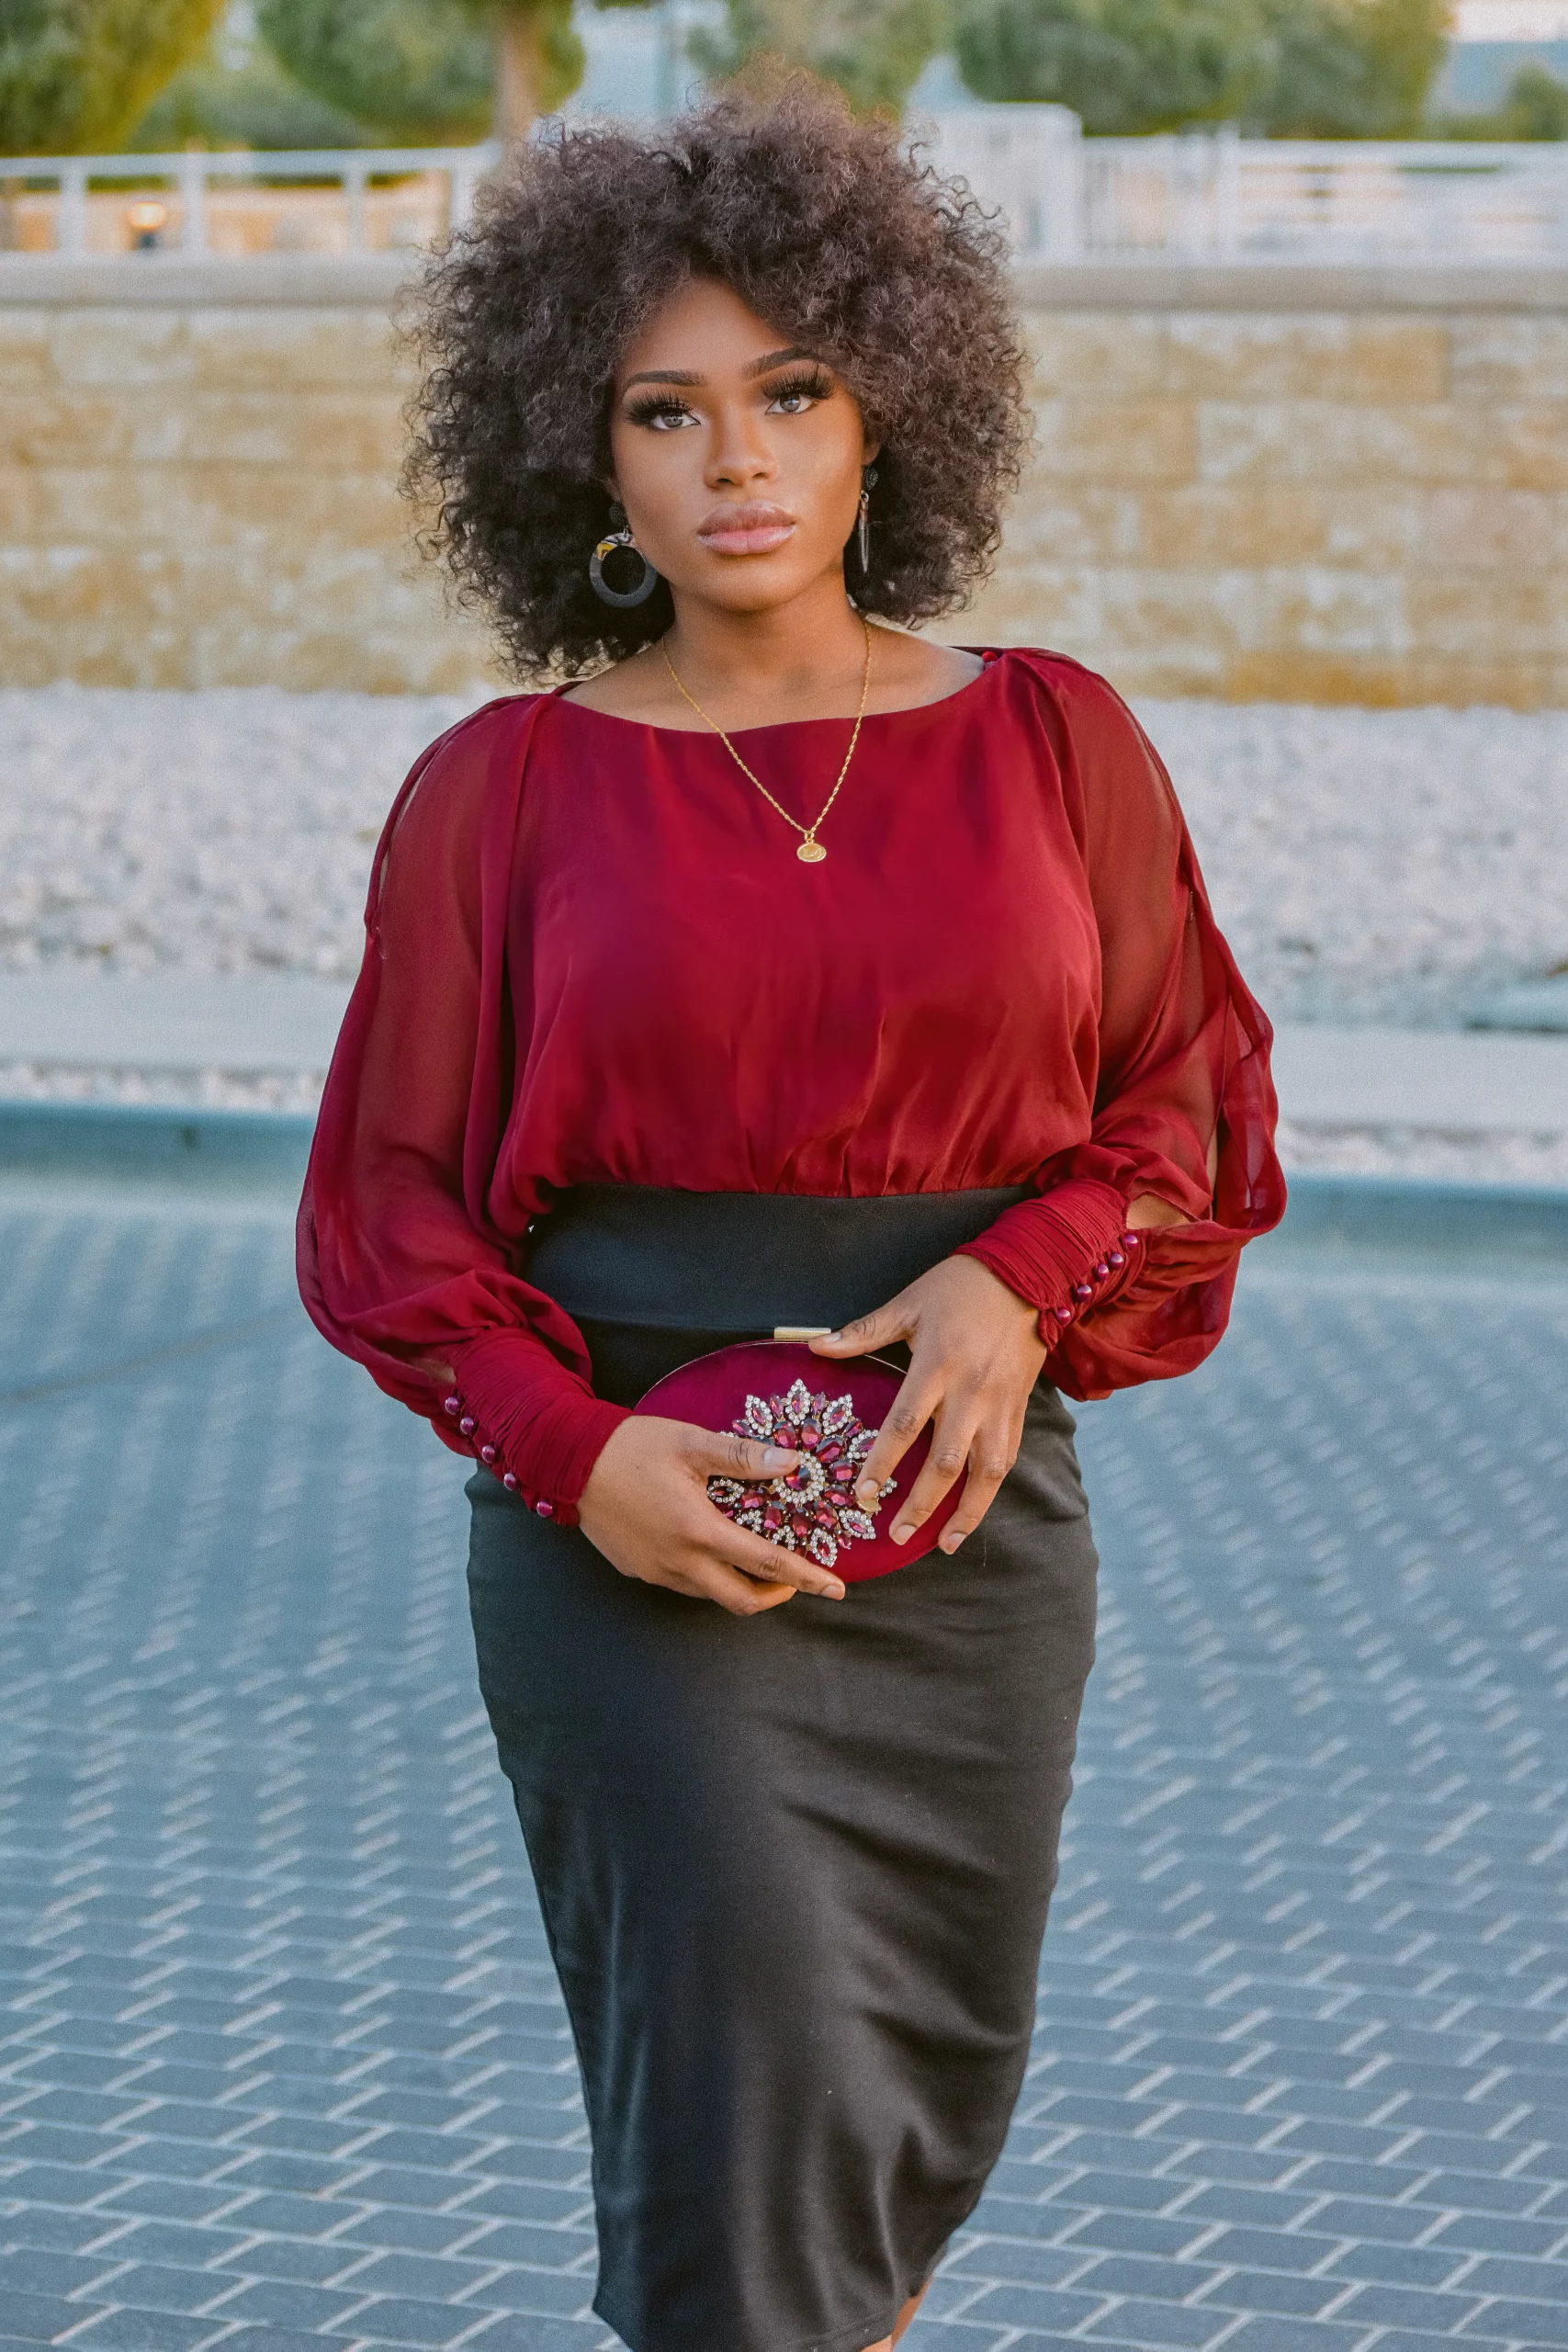 Fashionable black woman in red blouse and a black pencil skirt at street